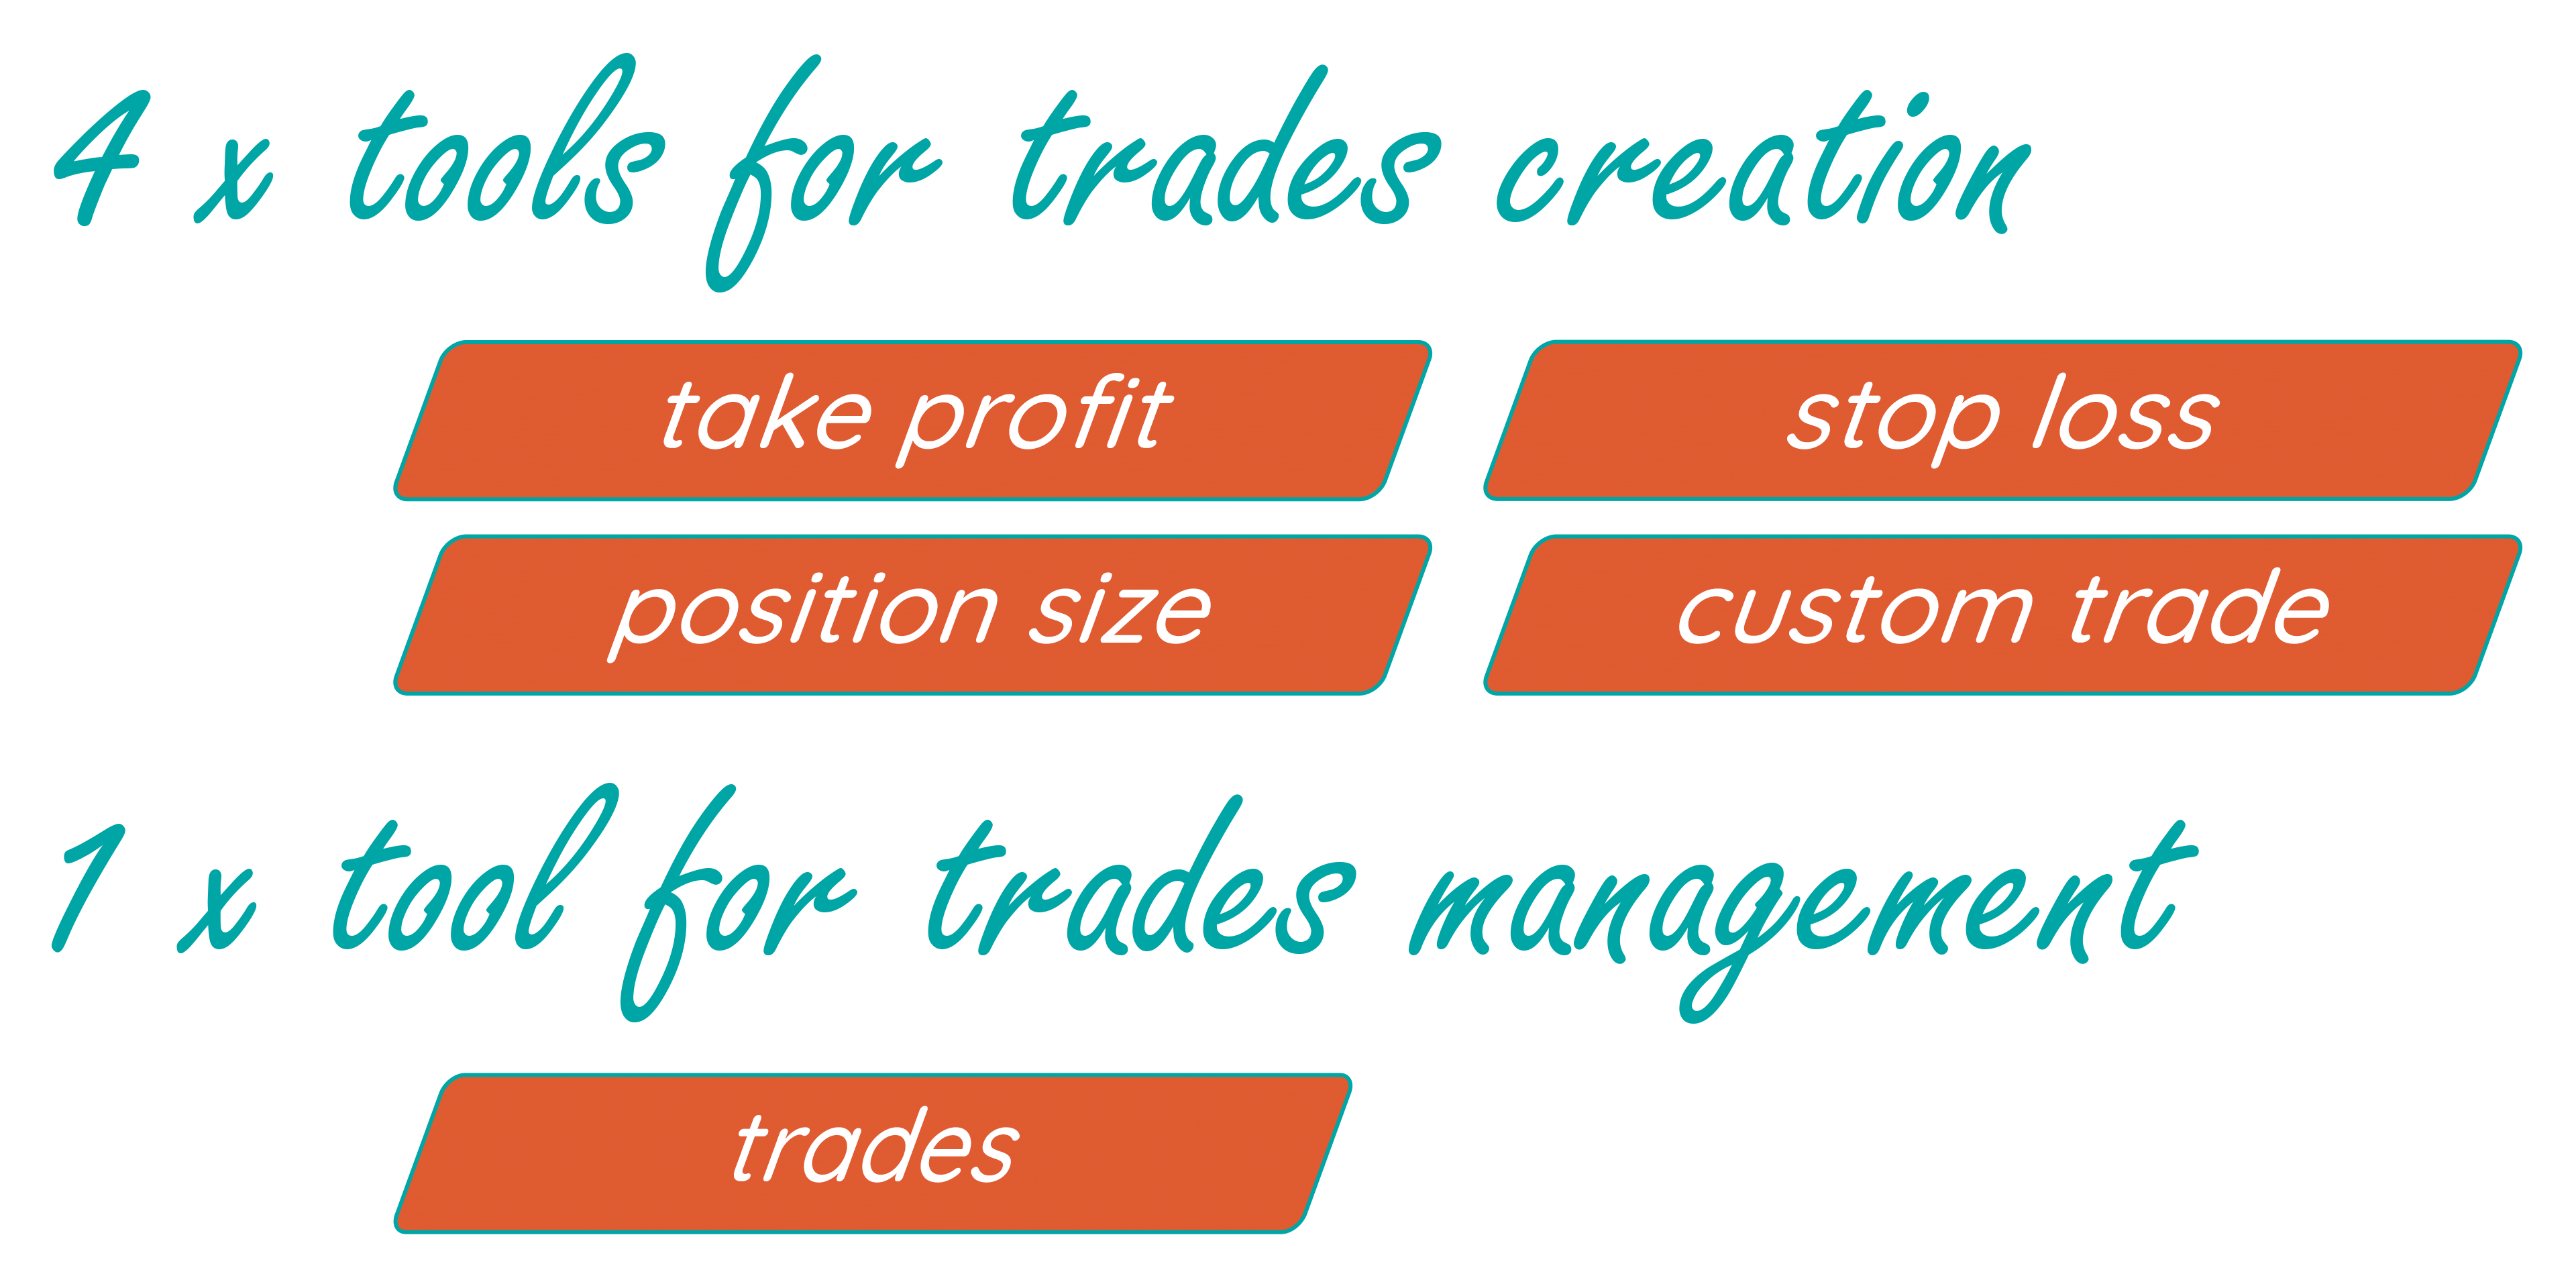 Trading management tools included in our toolkit